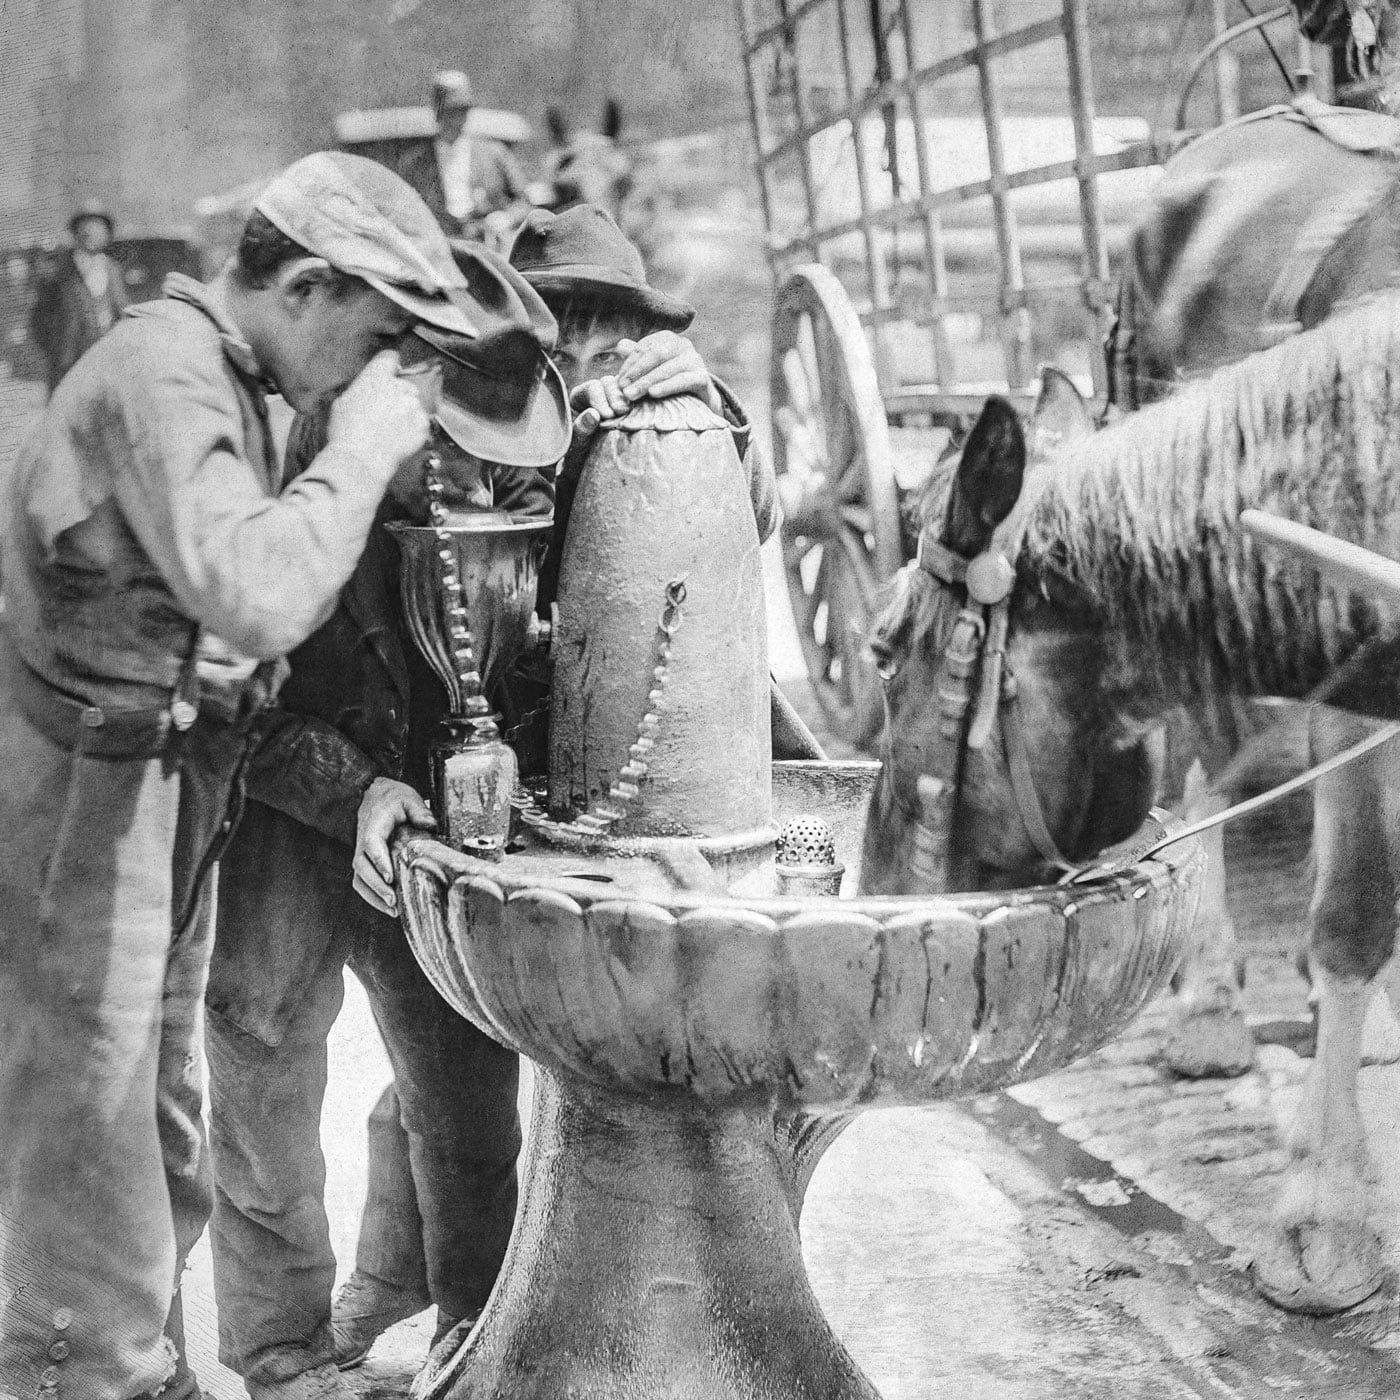 boys and a horse share a drinking fountain in 1887